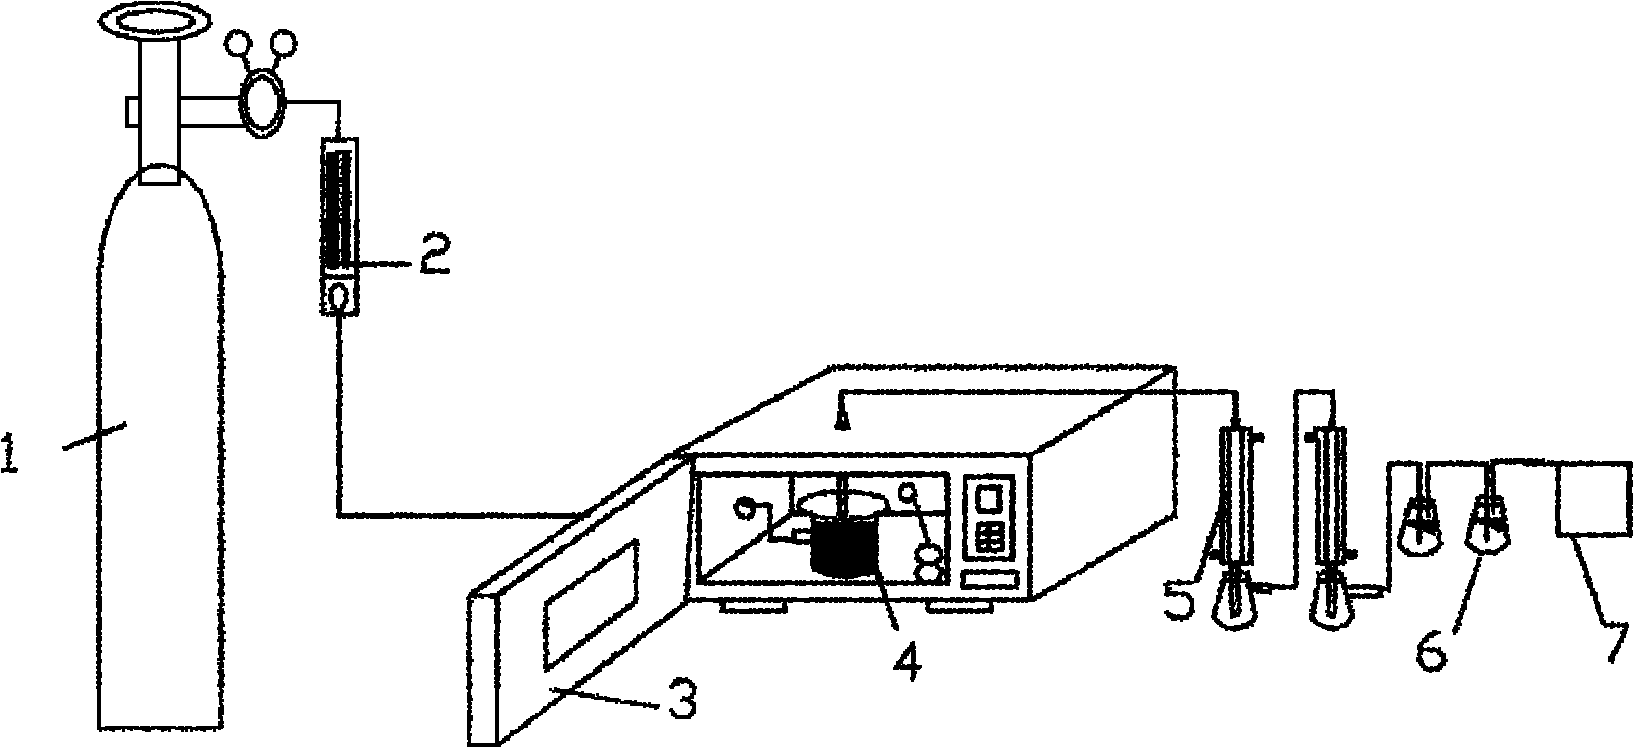 Method for reclaiming and treating electronic waste